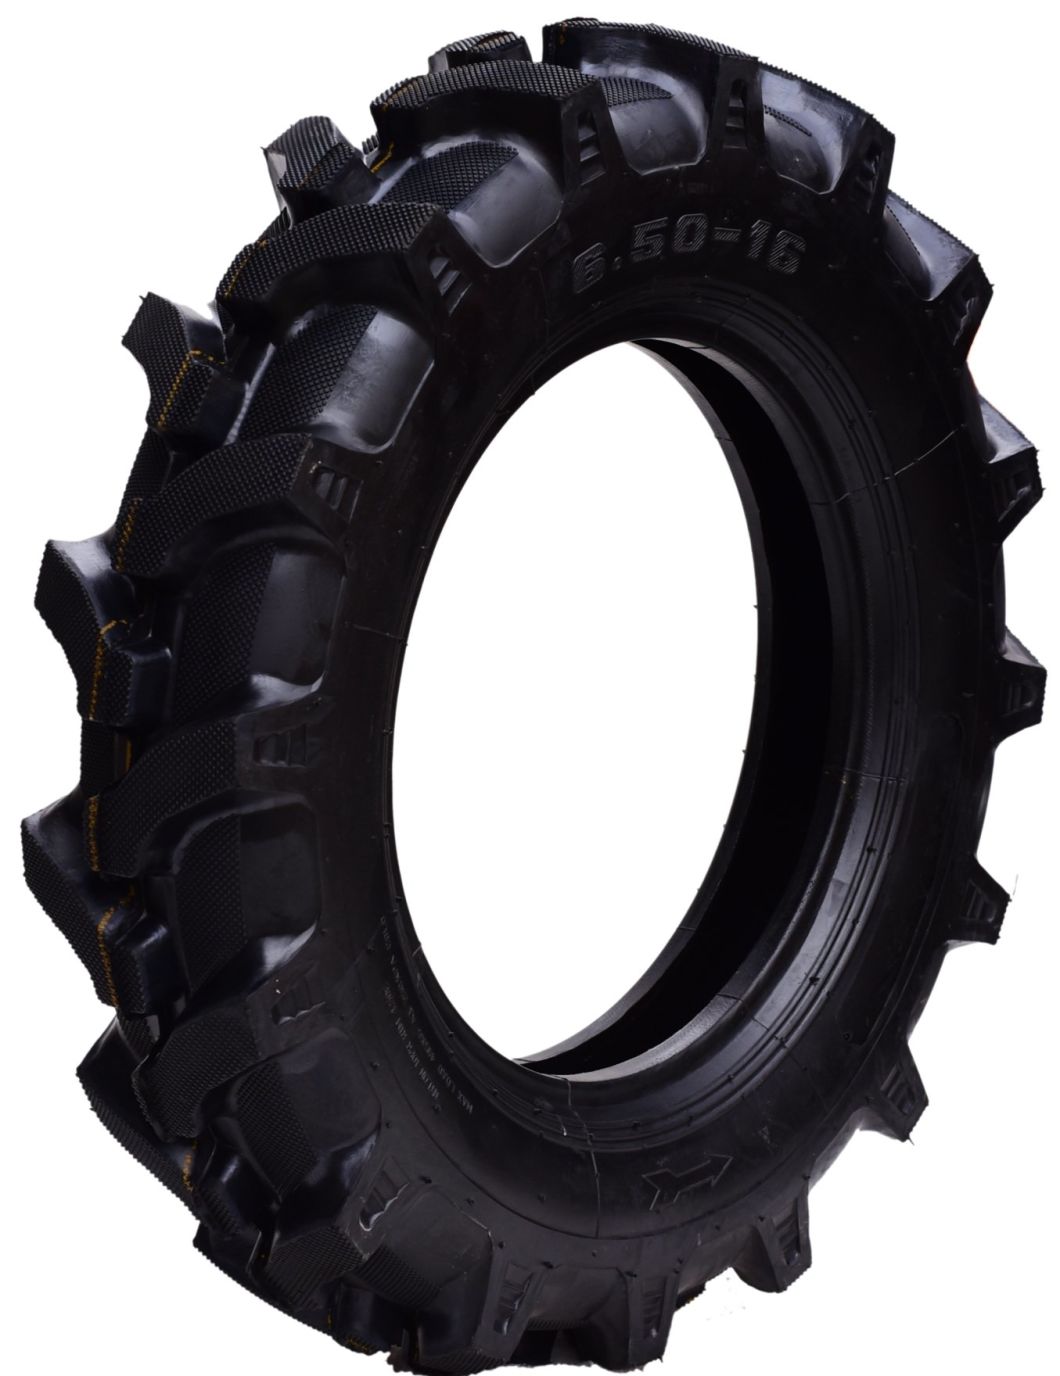 Farm Machine Tractor Tyres, TM700A1 Tractor Tires